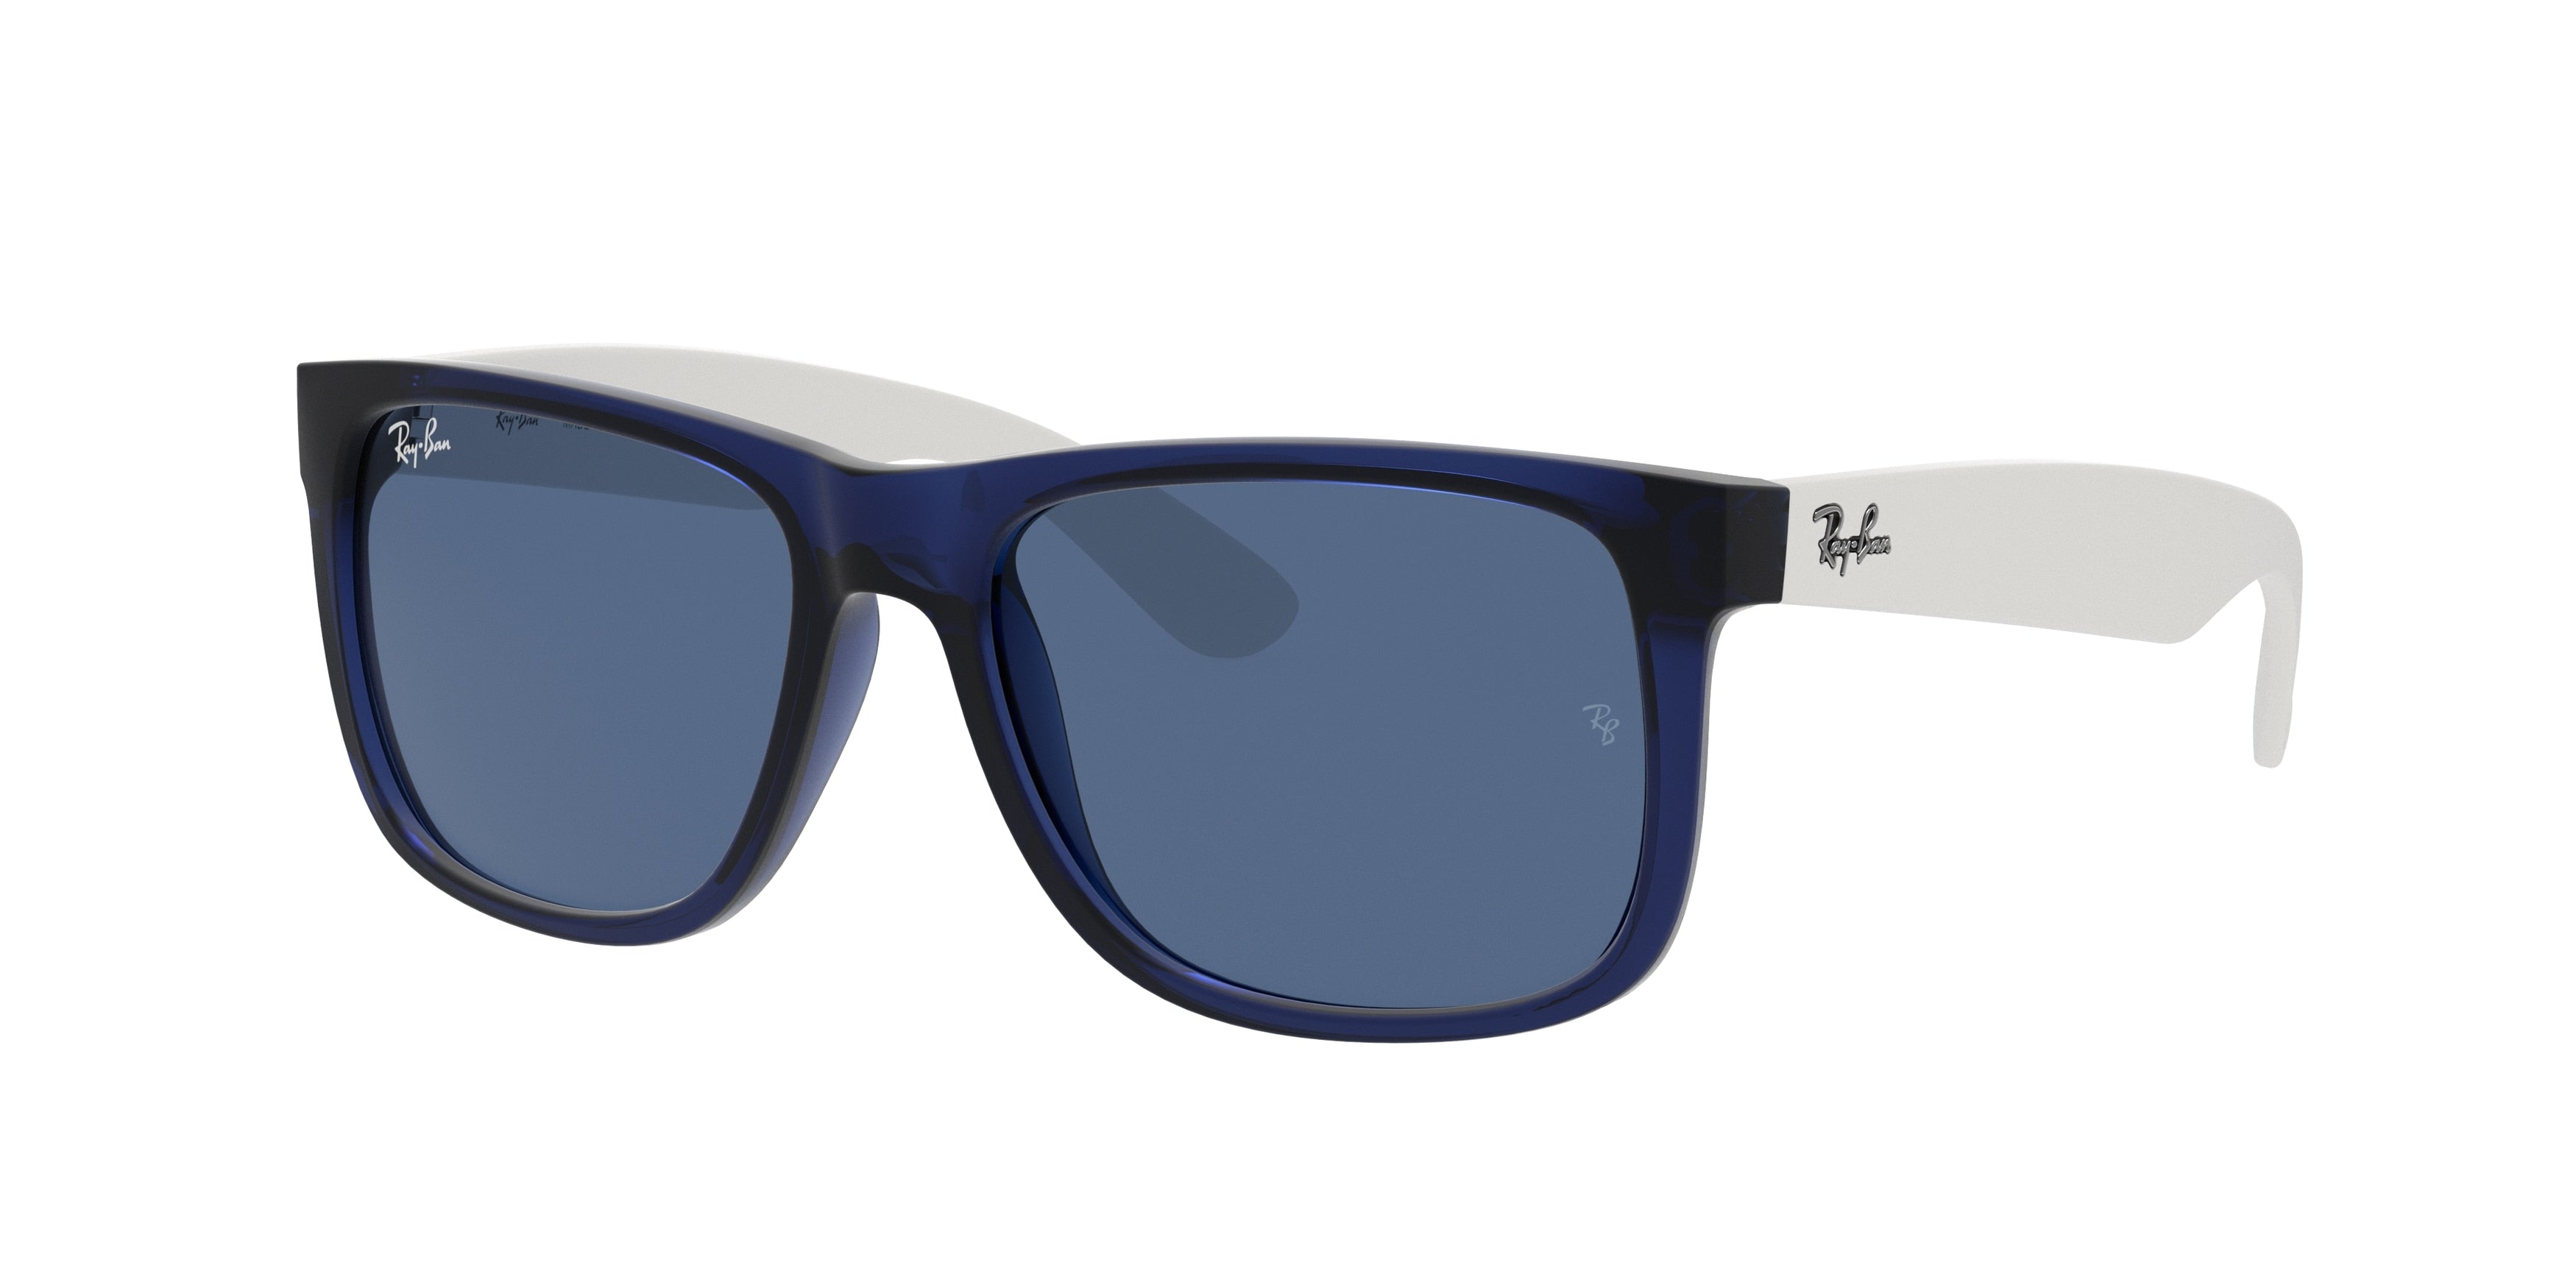 Ray-Ban JUSTIN RB4165 Square Sunglasses  651180-Transparent Blue 53-145-16 - Color Map Blue